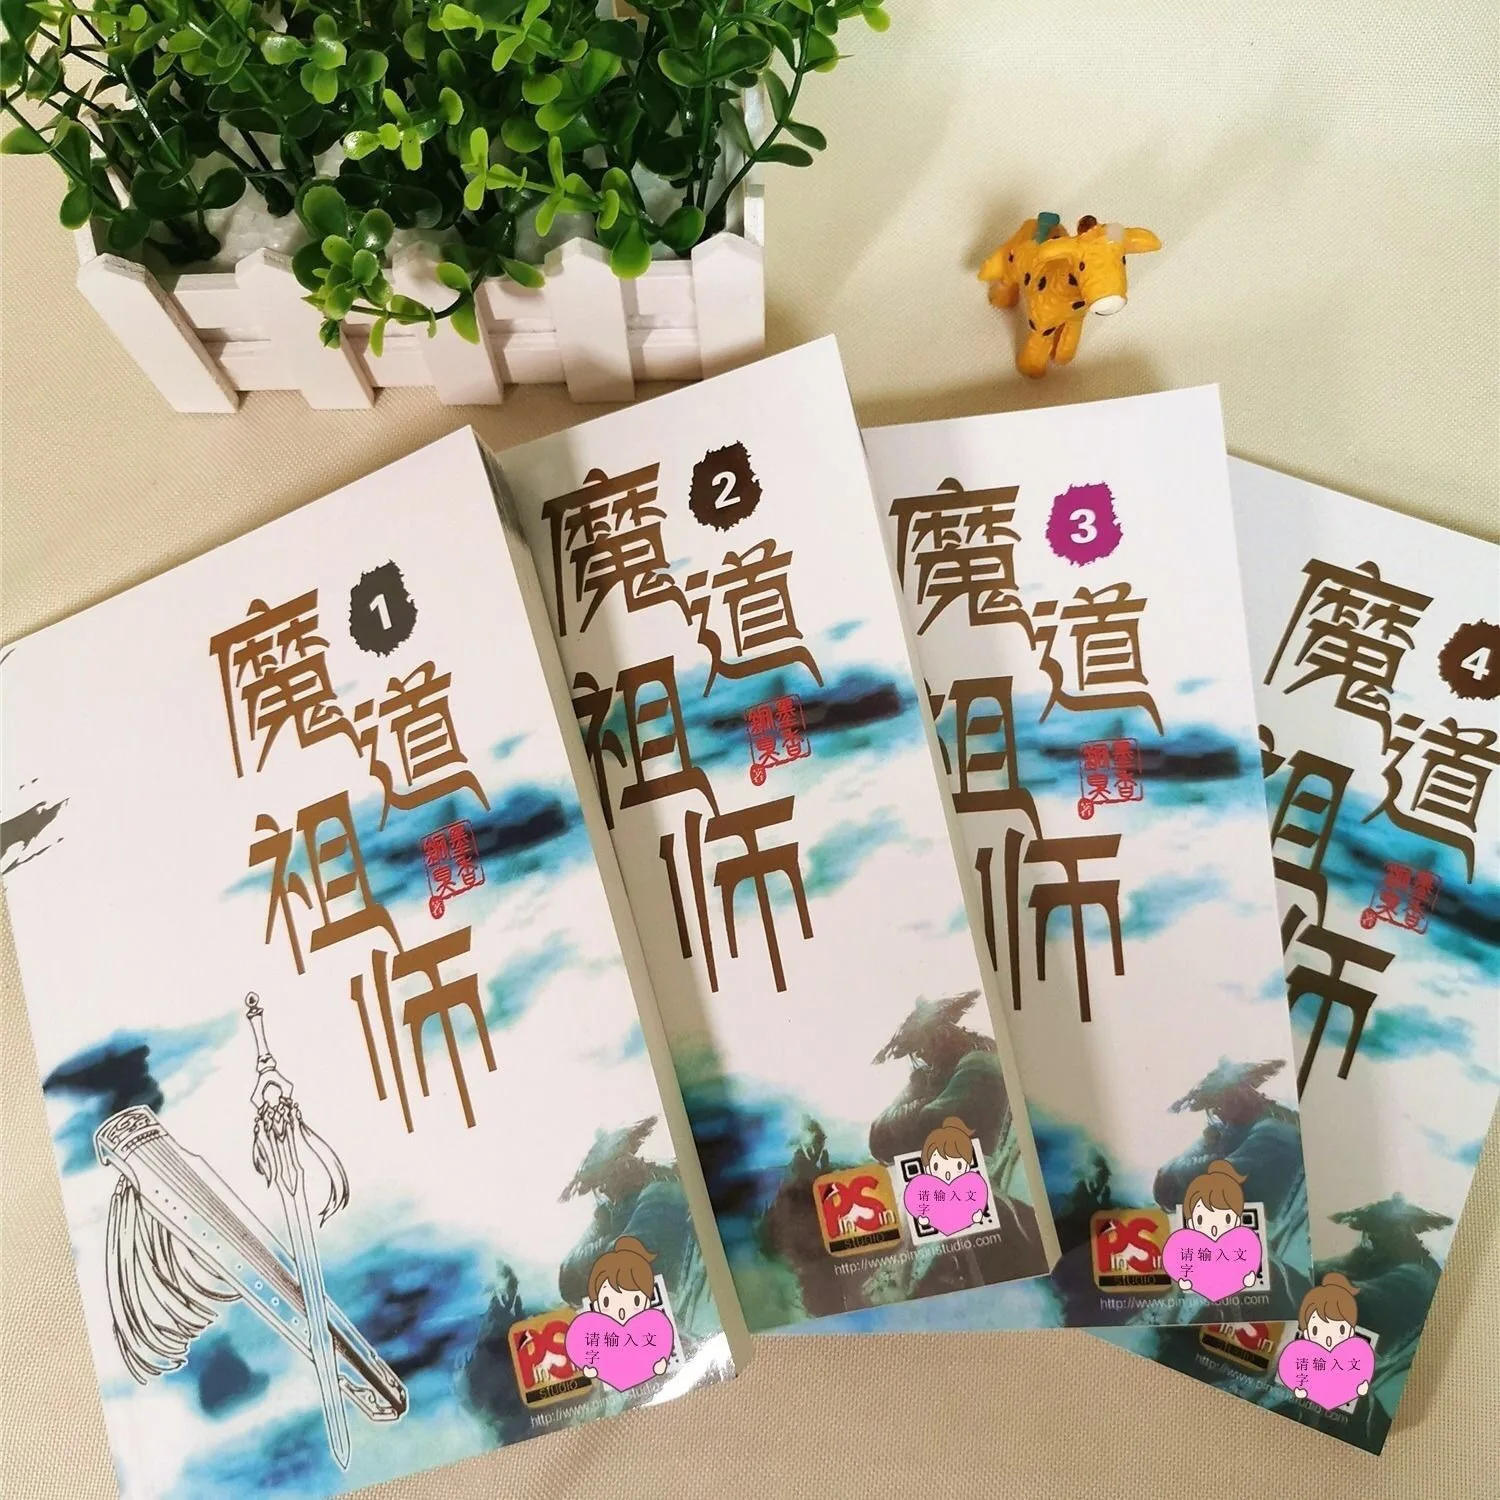 Mo Dao Zu Shi novel manga book full sets of 4 volumes with extra bookmarks Chinese novels comic books for adults magic patriarch